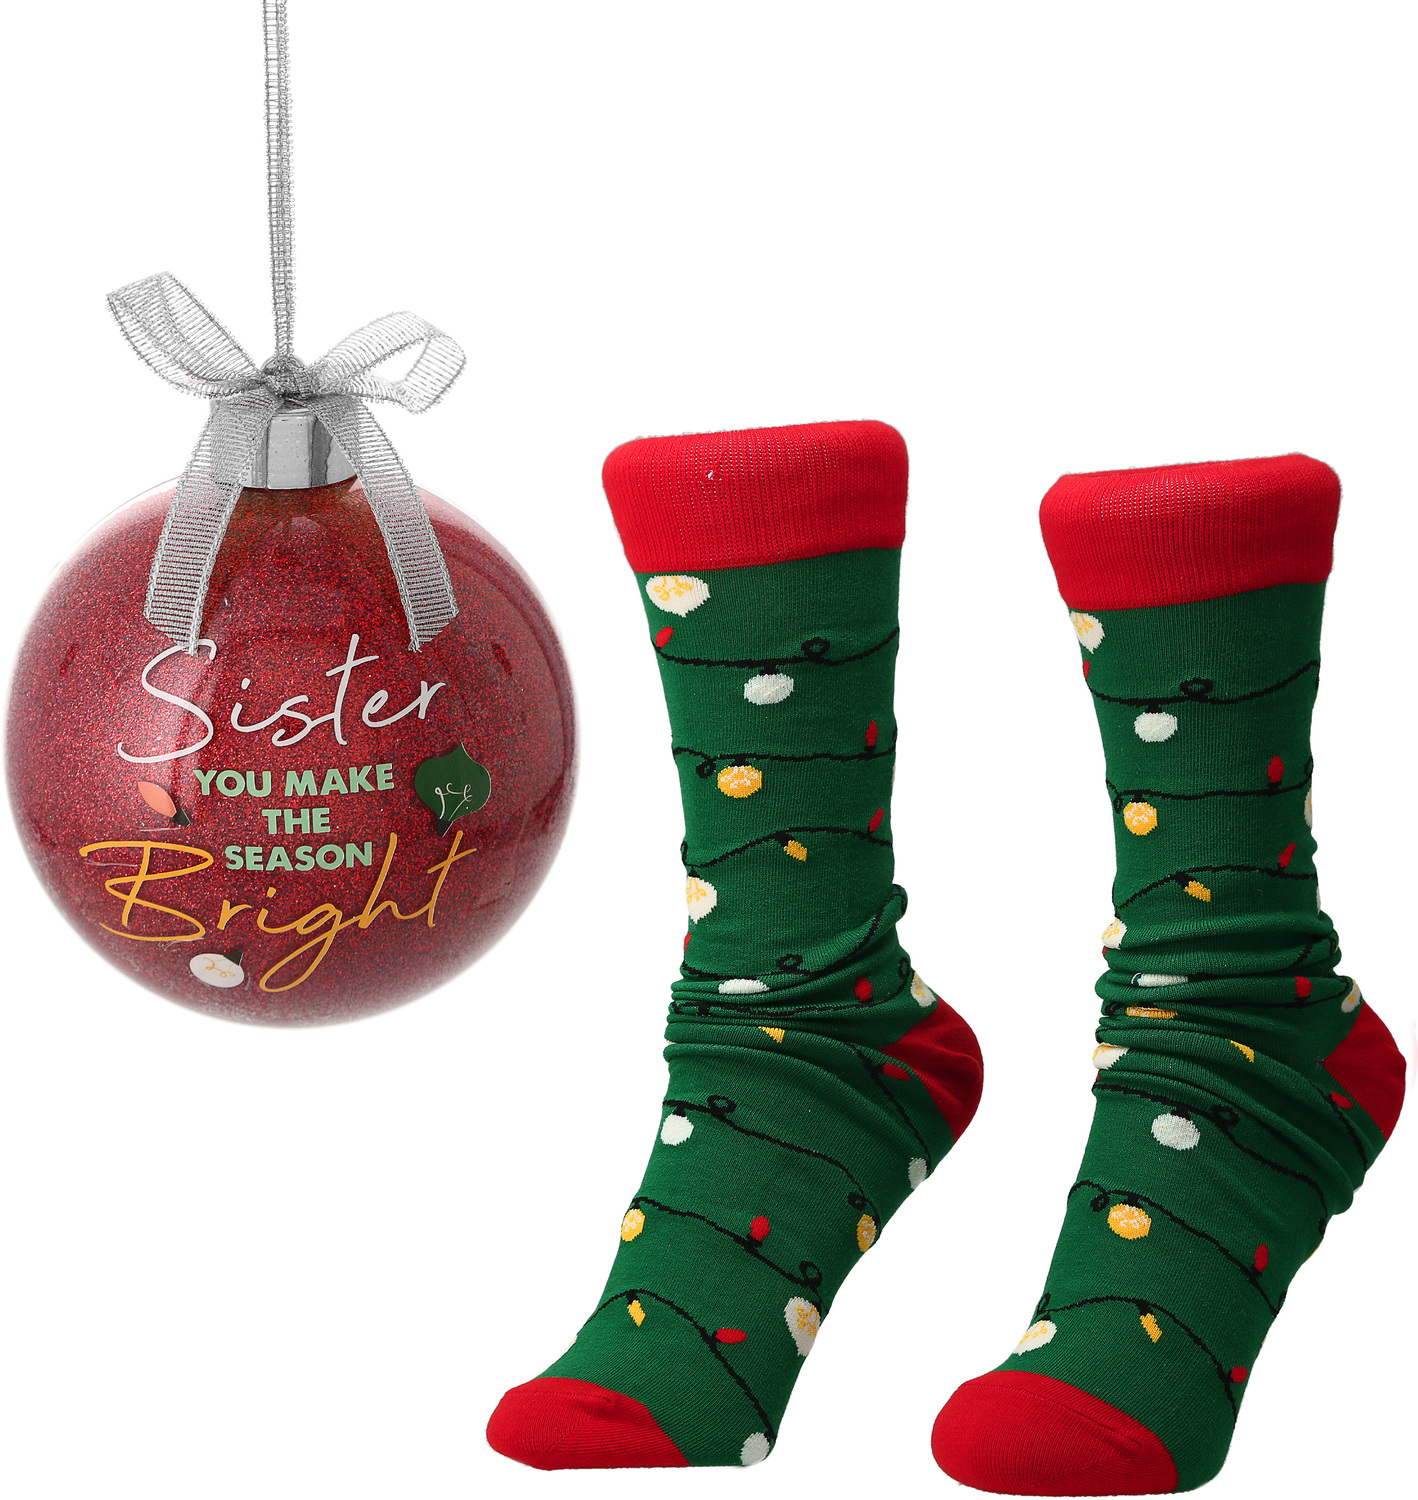 Sister by Warm & Toe-sty - Sister - 4" Ornament with Unisex Holiday Socks